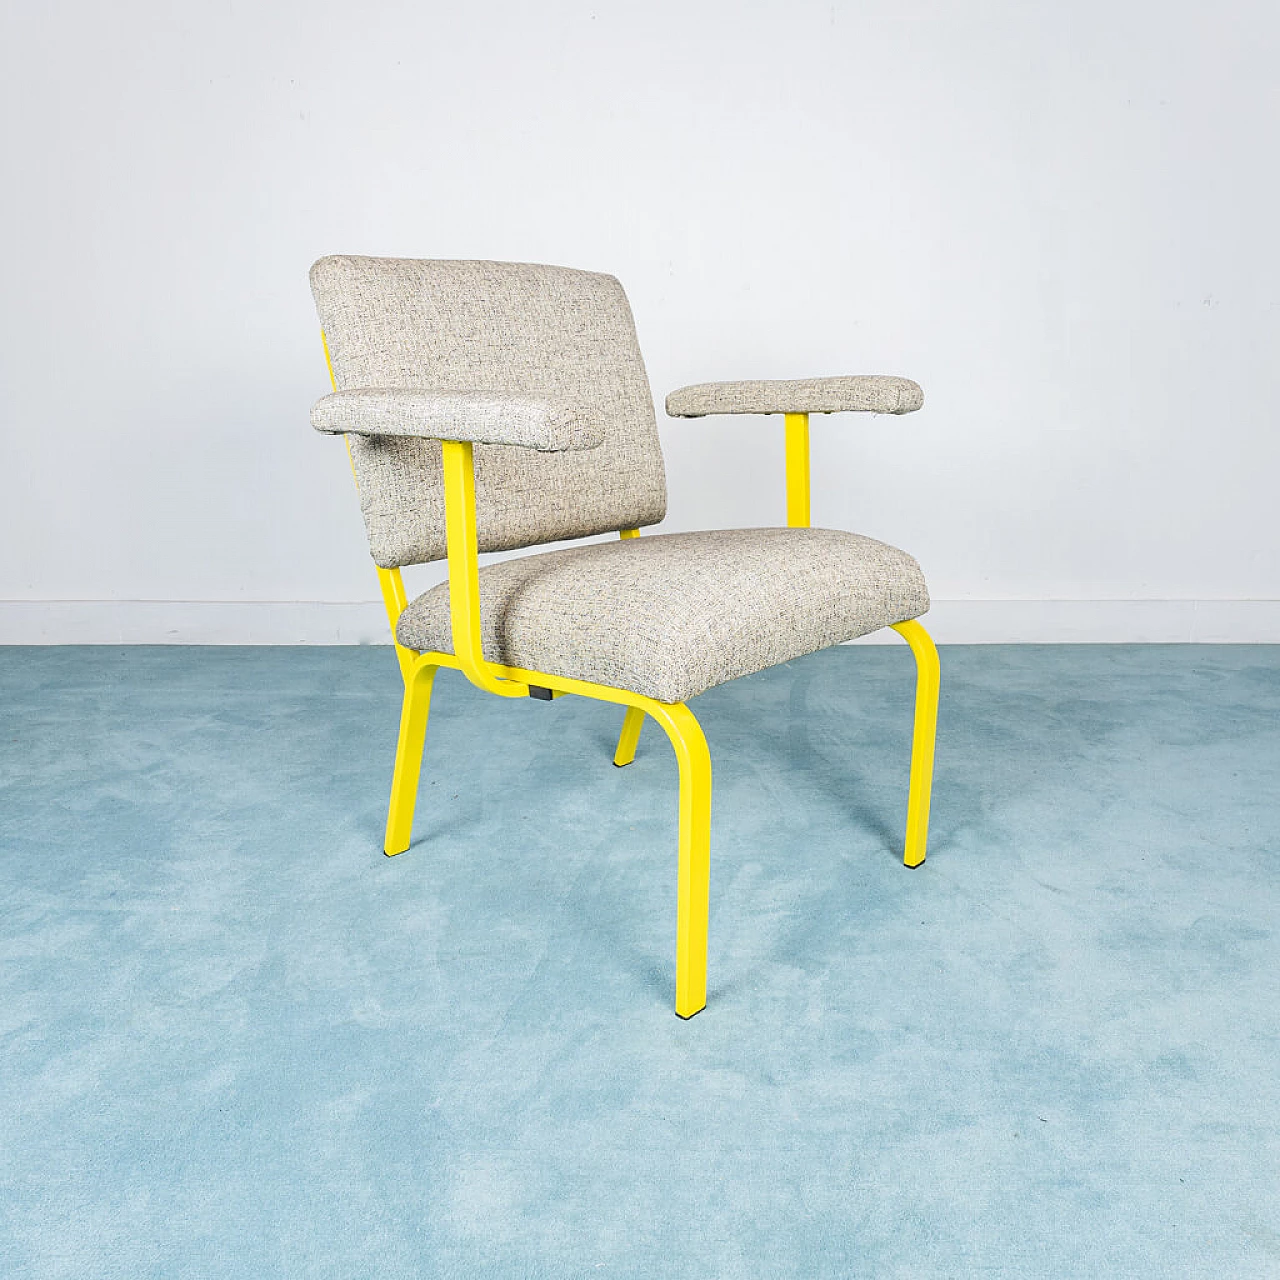 Set of 3 handcrafted chairs in yellow metal and gray fabric, 70s 1207083